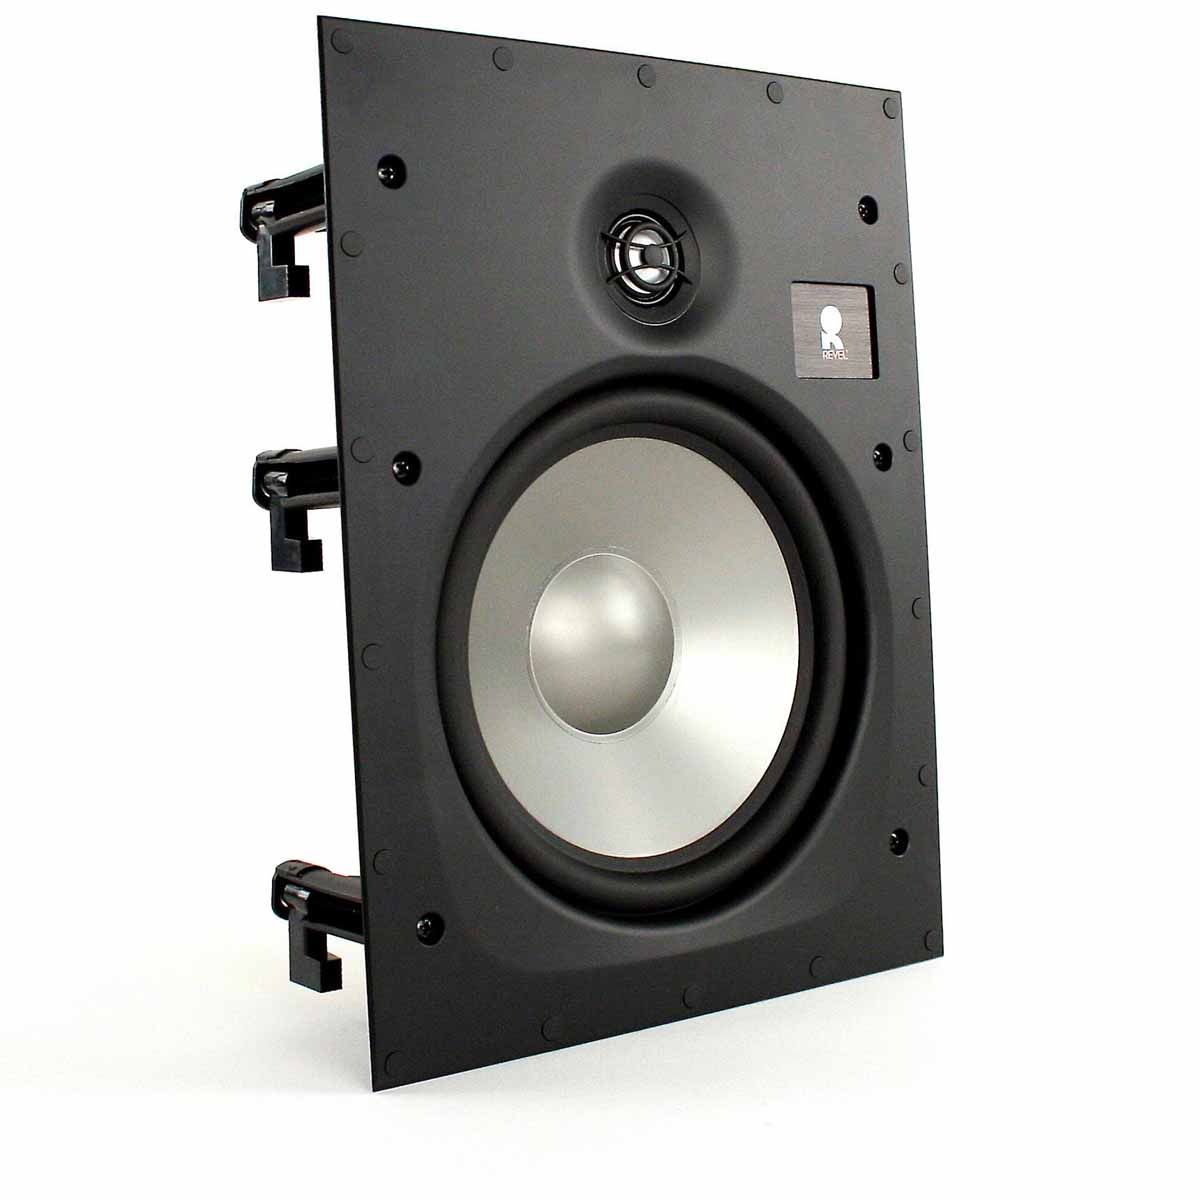 Revel W383 In-Wall Speaker angled front view